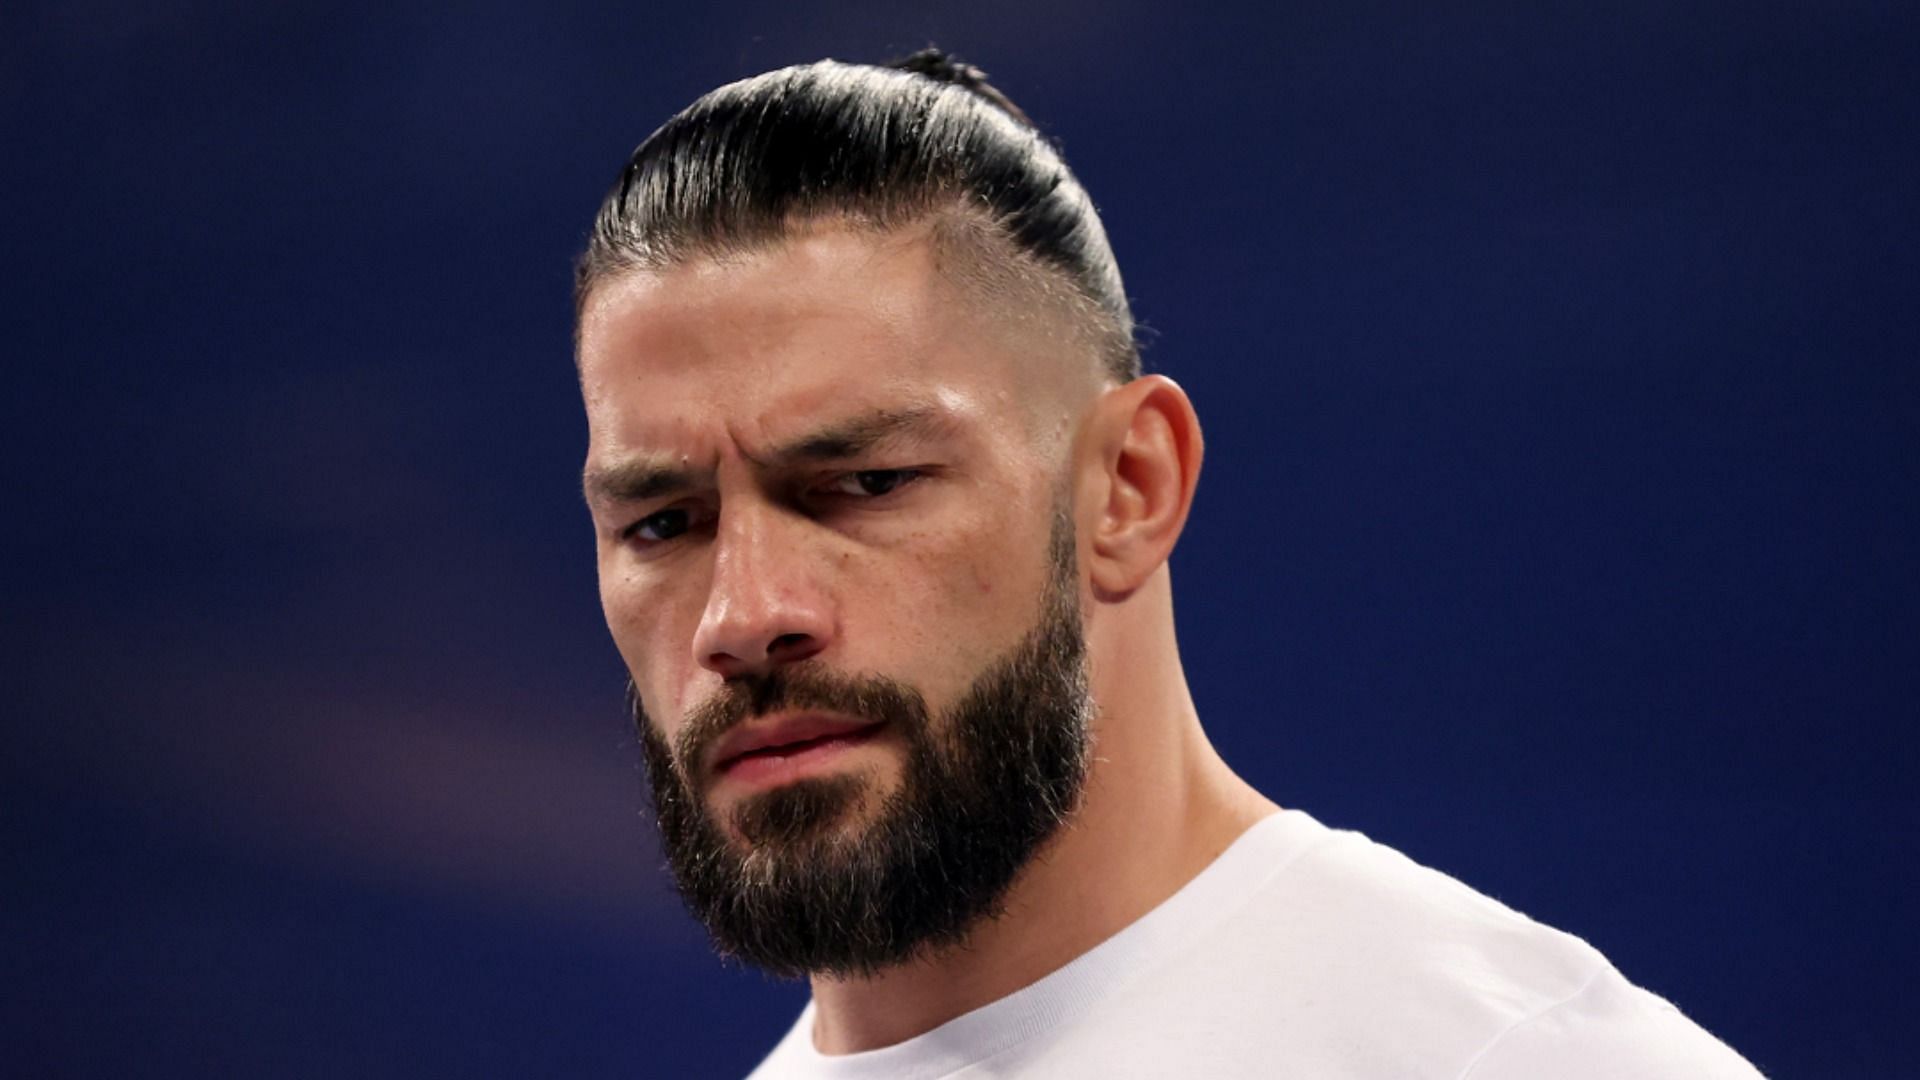 Roman Reigns hints at leaving WWE